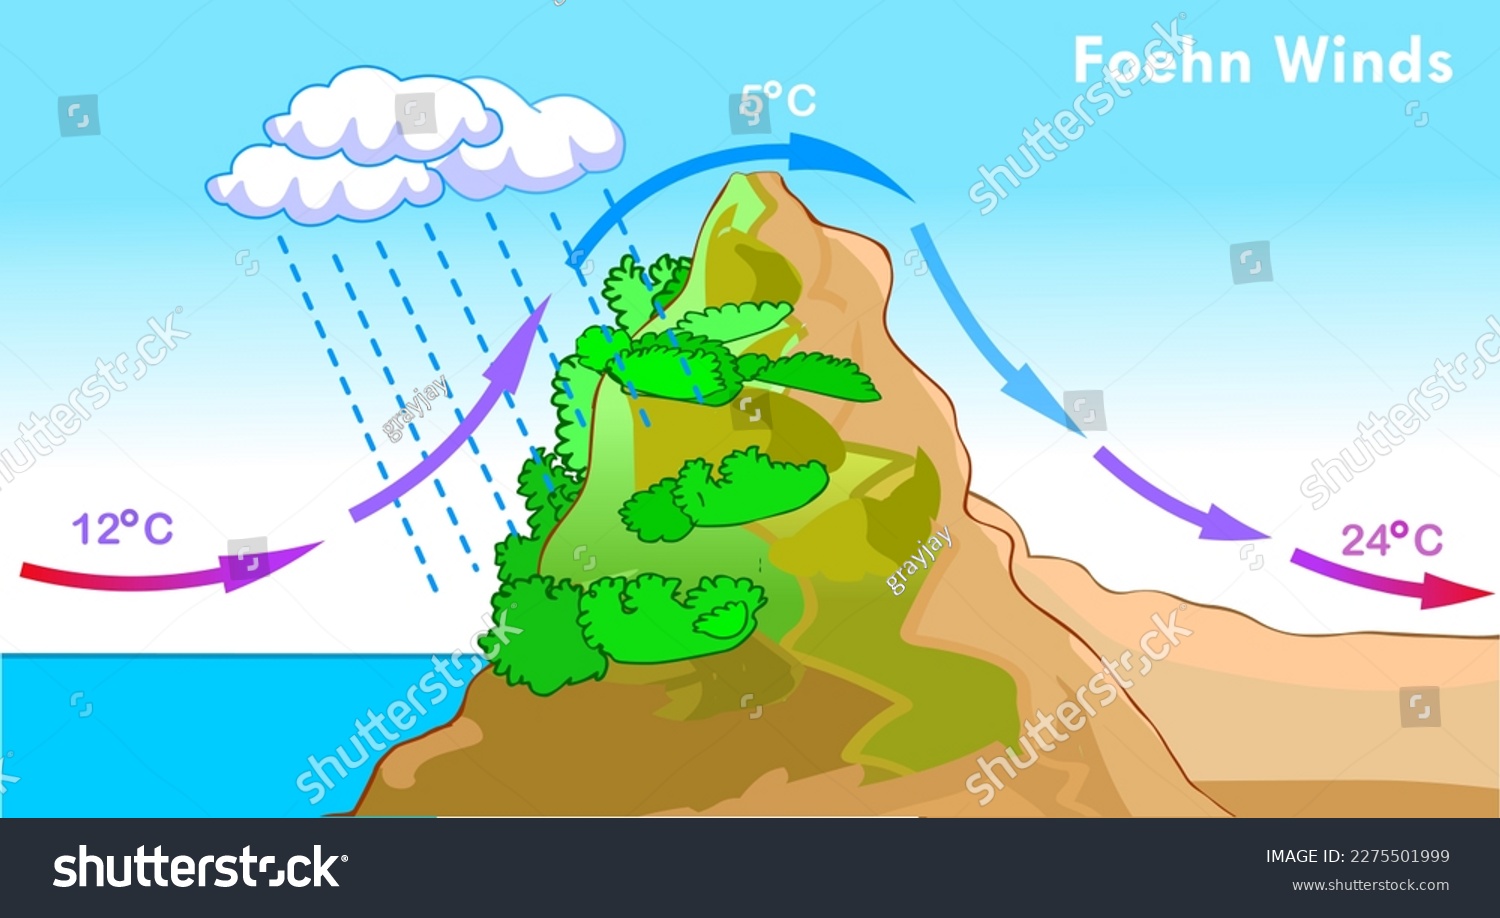 Foehn wind, chinook warm effect. Sea level, mountain. Weather direction. Warming, cooling air heat. Climate formation. Zonda, diablo, nor wester. Geography landforms, elevation. Illustration vector. #2275501999